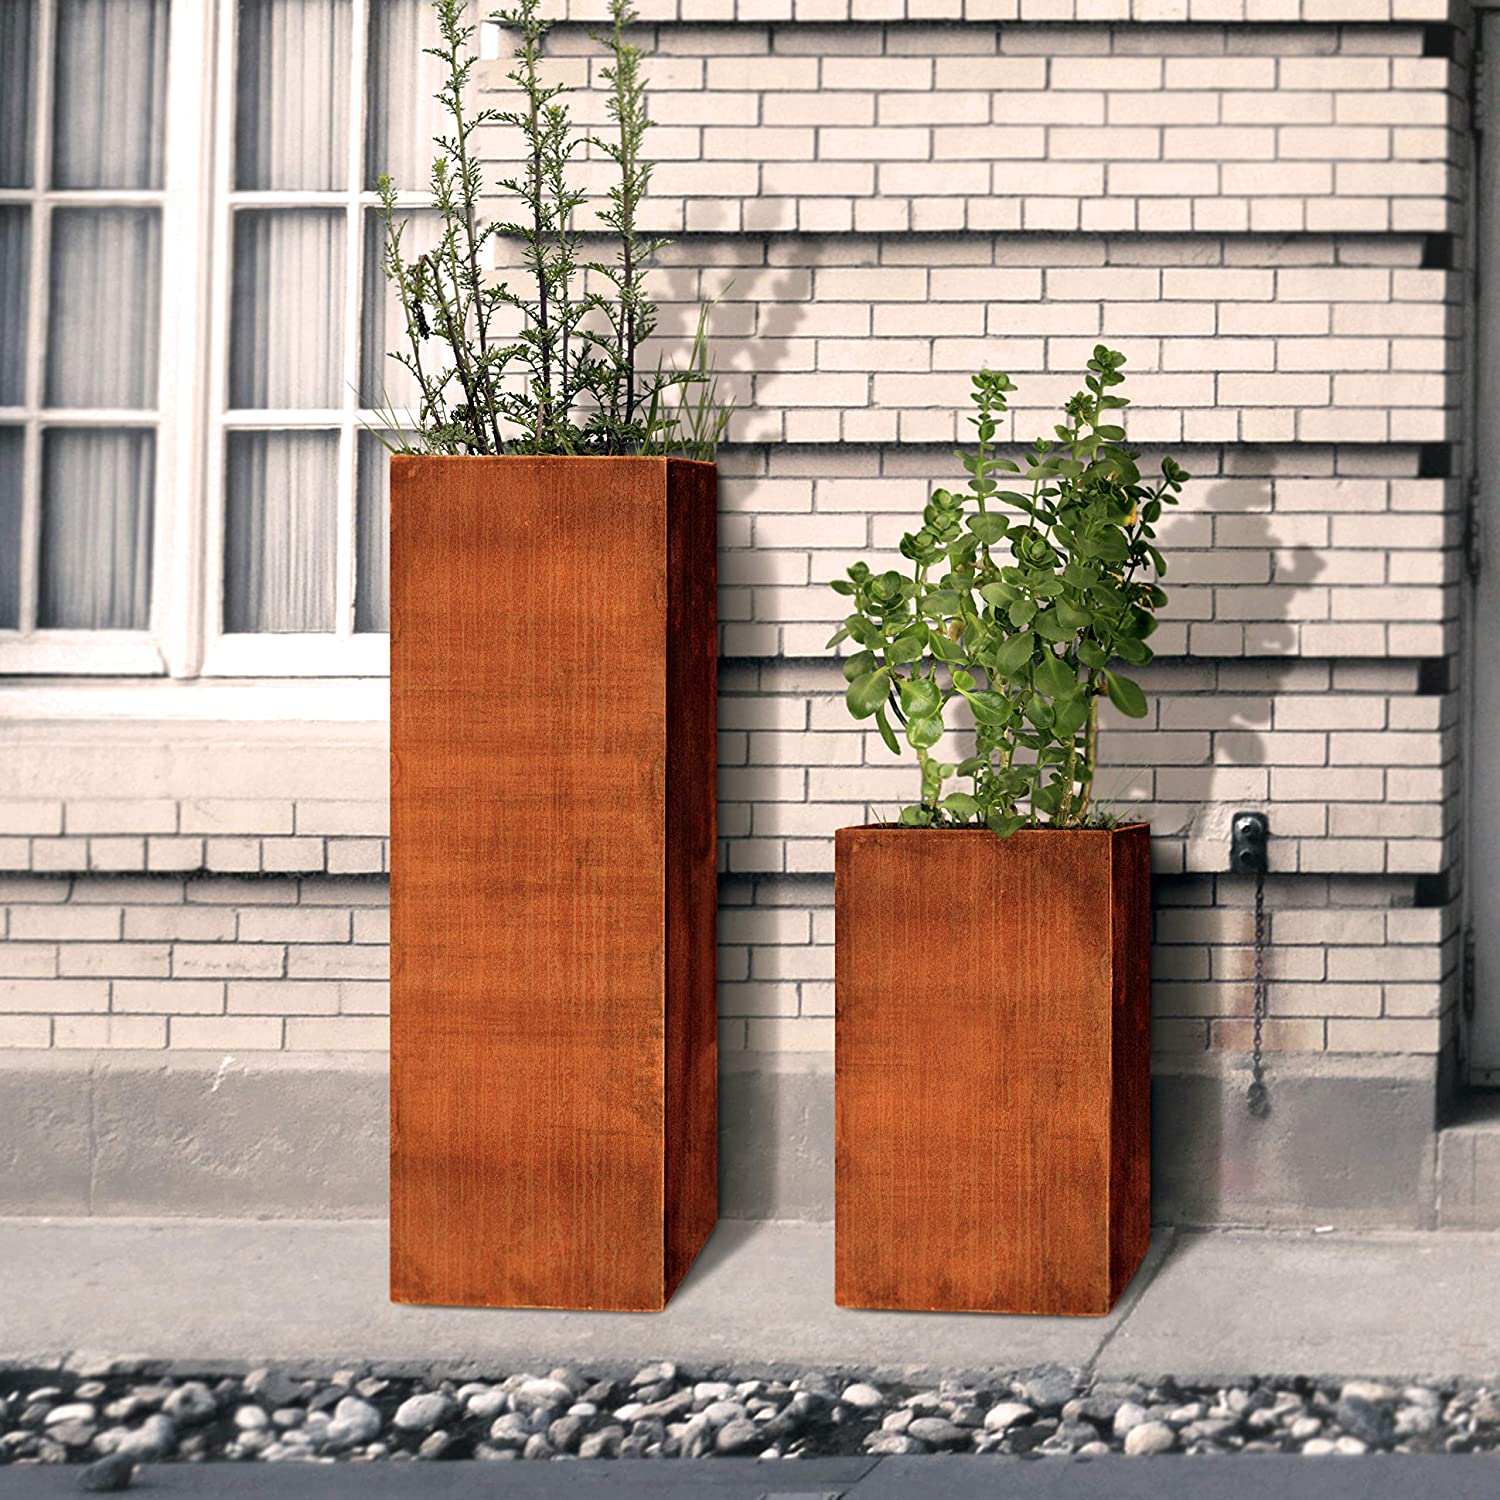 Two tall Corten Steel planters with foliage in them against a white brick wall.